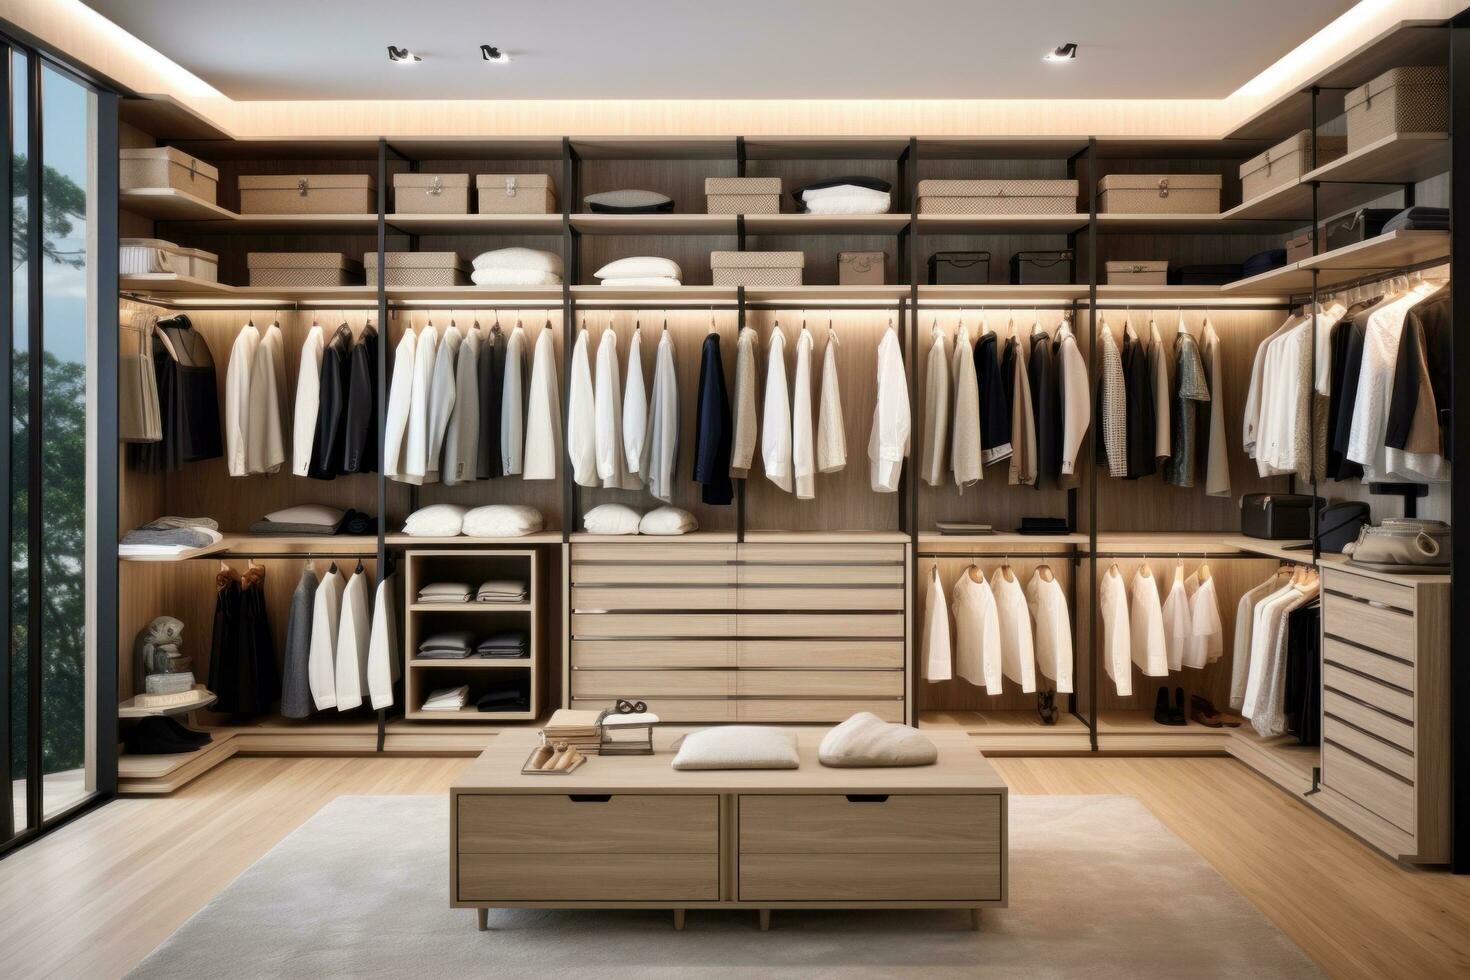 AI generated clean, wellorganized, and tidy closet photo